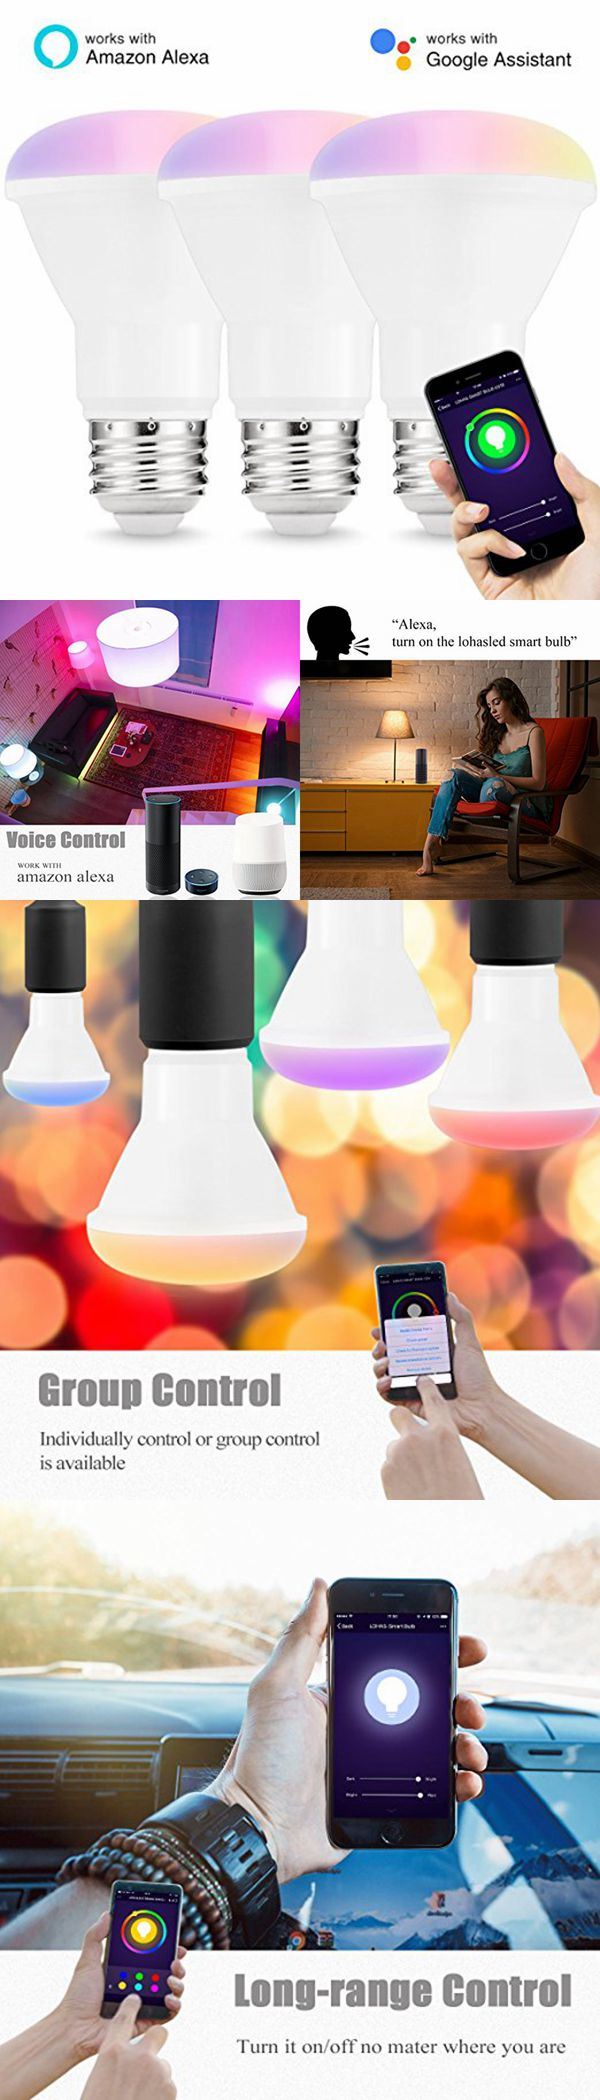 Lohas Br20 Multicolored Lights 8W Work with Alexa Smart Phone Control Dimmable Light Bulb